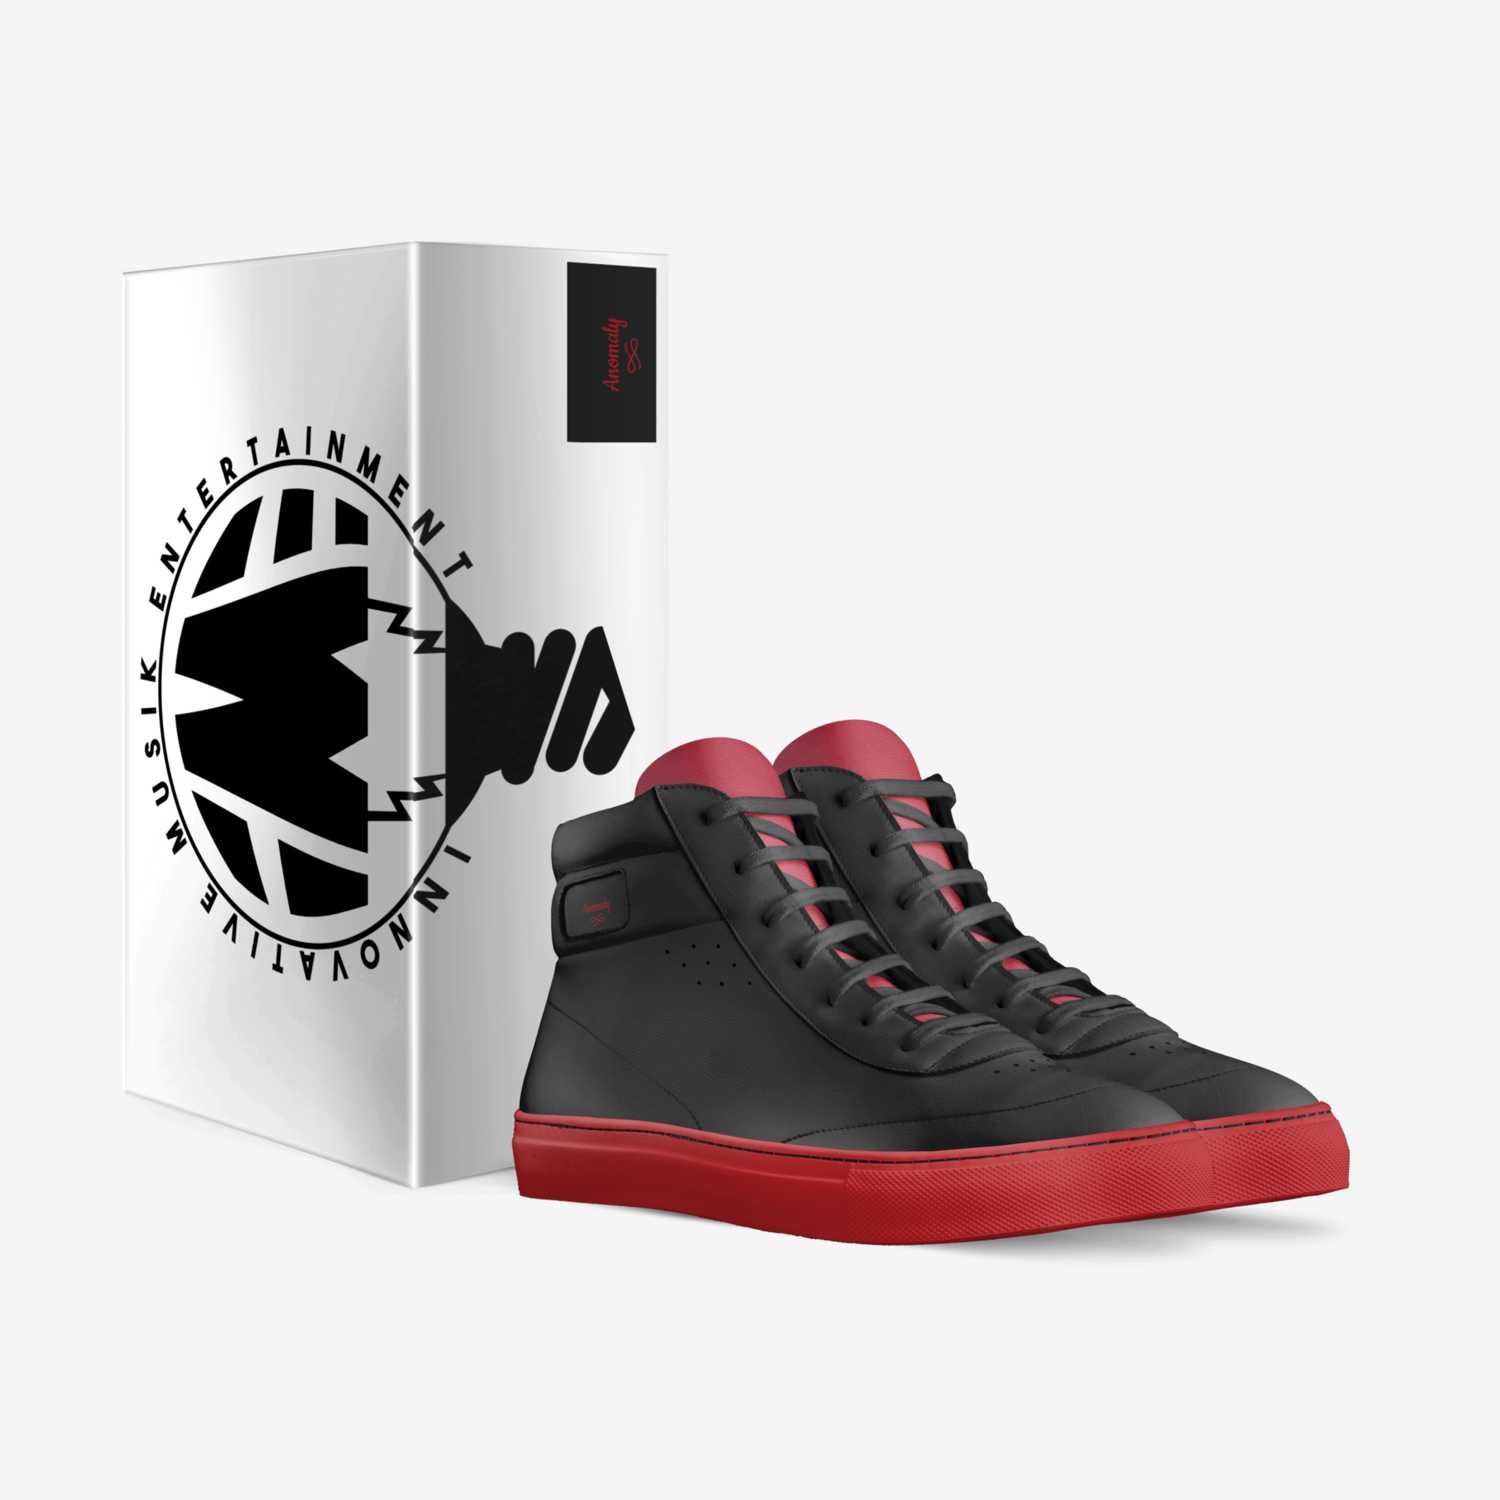 Anomaly custom made in Italy shoes by Sinister Beatz | Box view